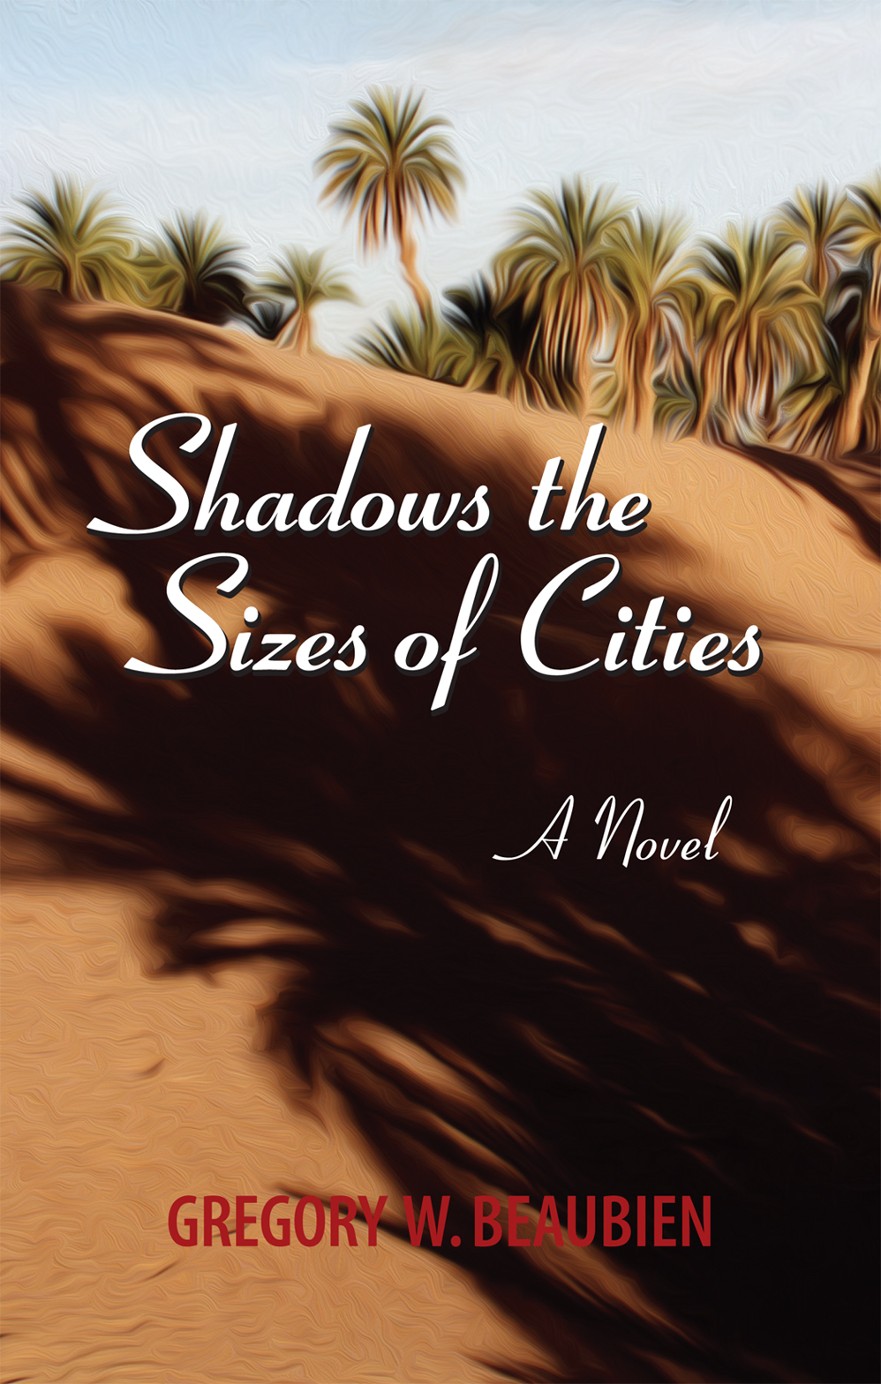 Best books to read in + about Morocco - Shadows the Sizes of Cities - Gregory Beaubien